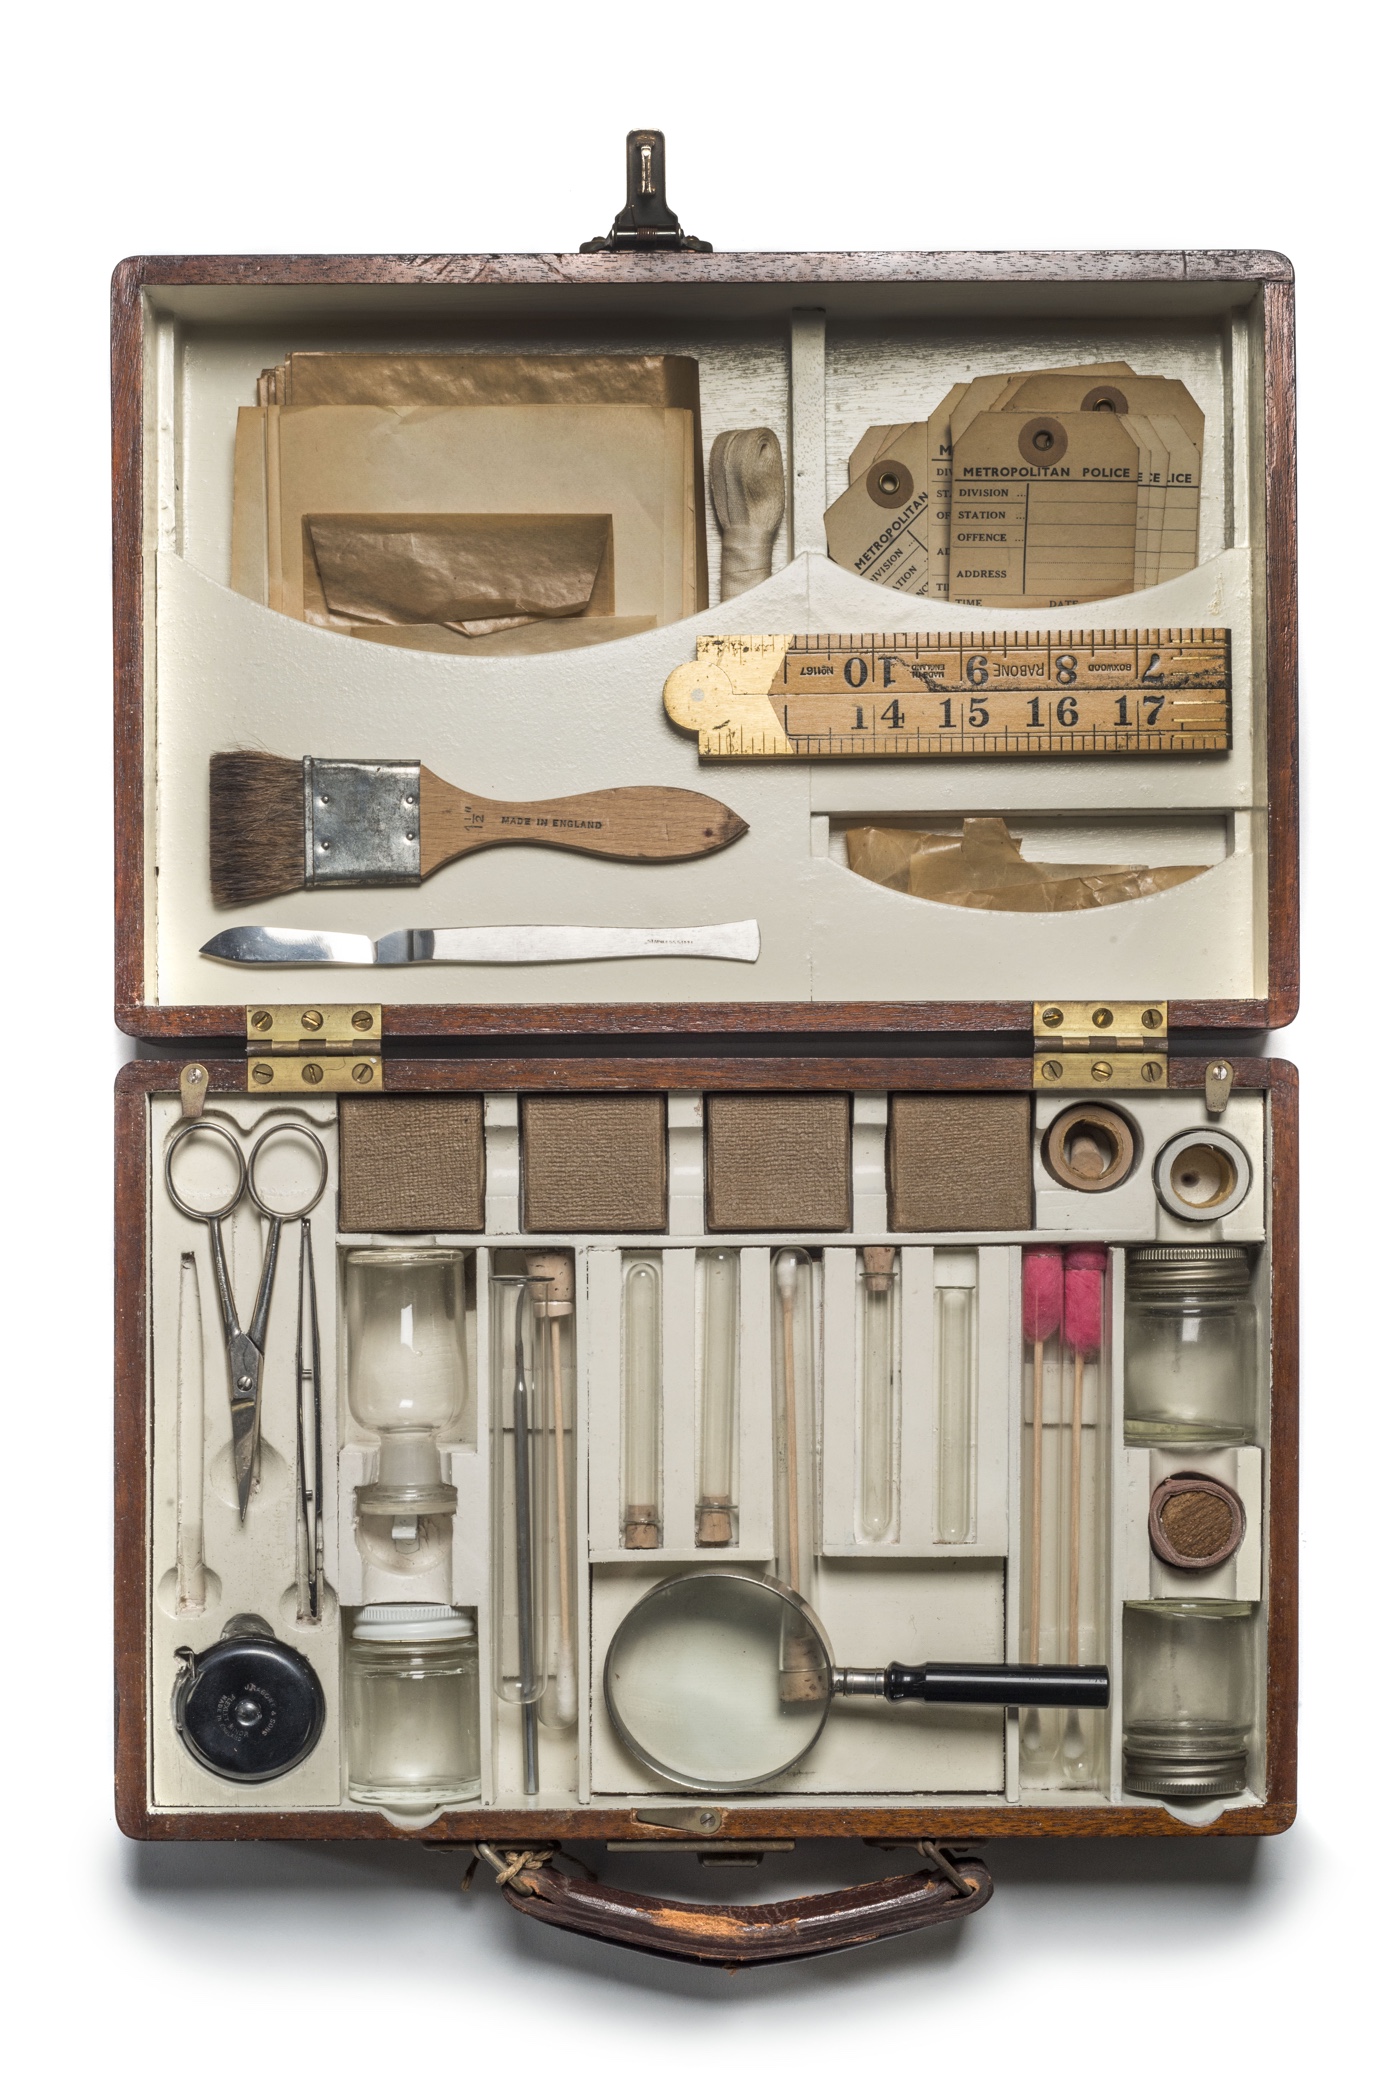 Murder bag: a forensics kit used by detectives attending crime scenes © Museum of London